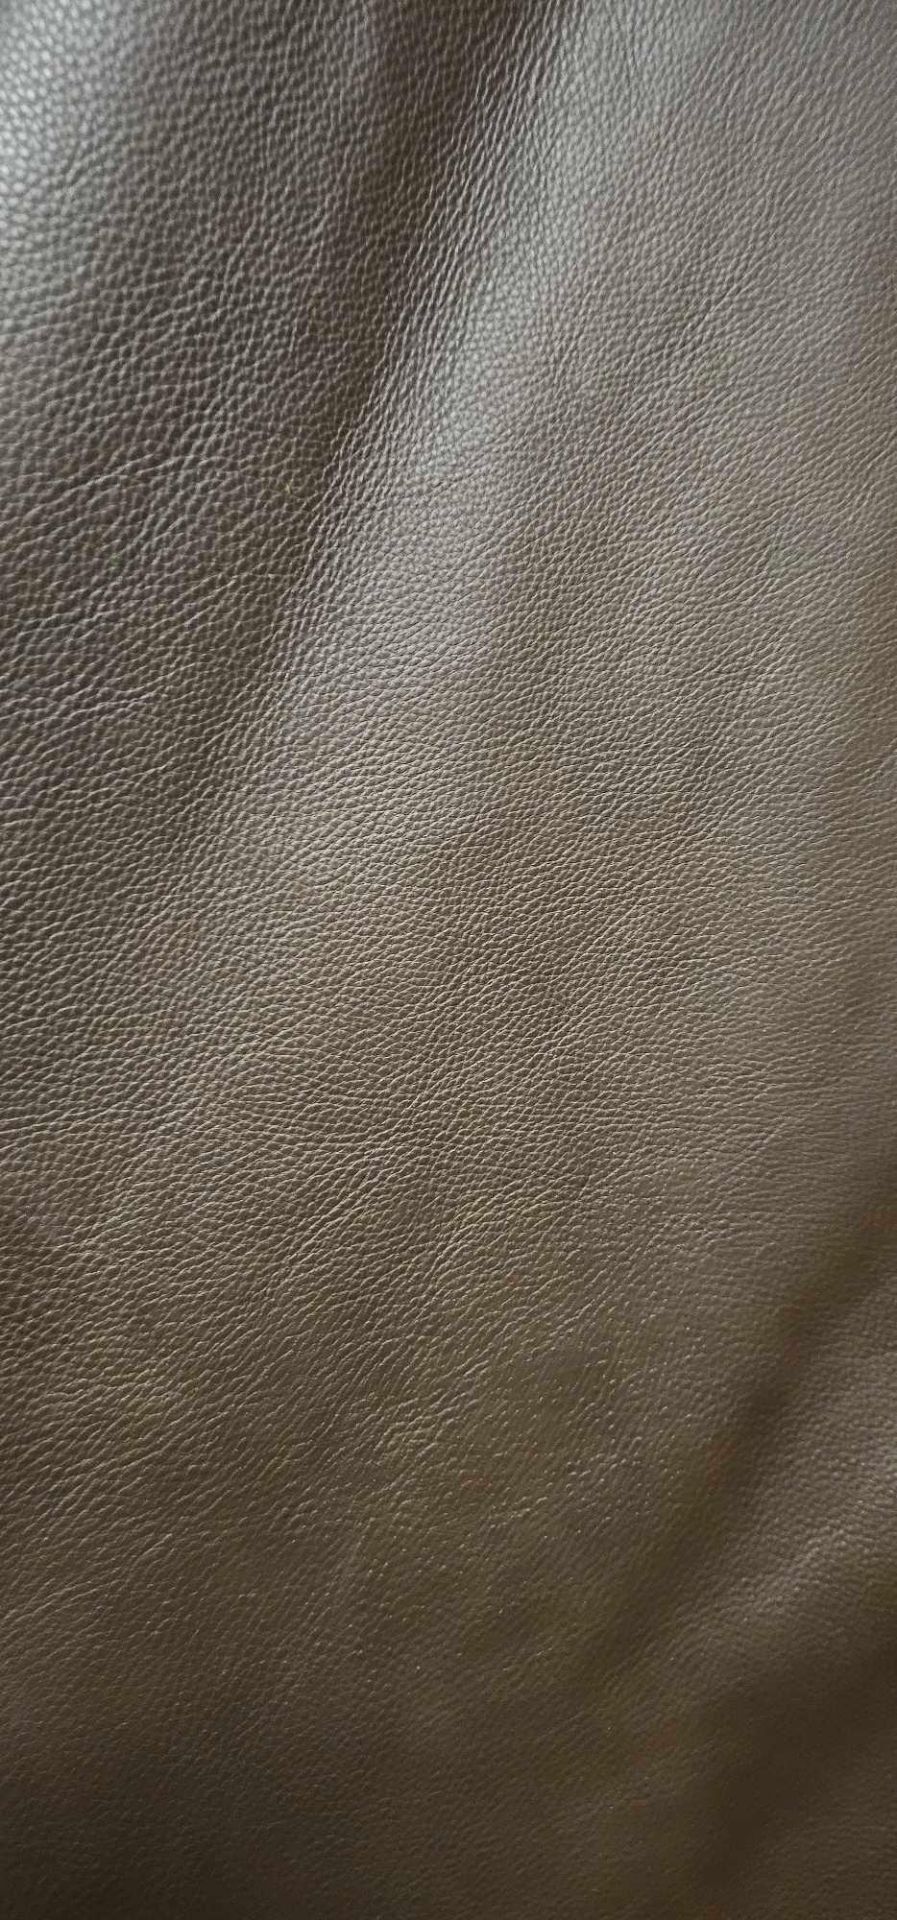 Mastrotto Italy Calbe Leather Cow Hide Chocolate Brown Approx 3.0m2 - Image 4 of 5